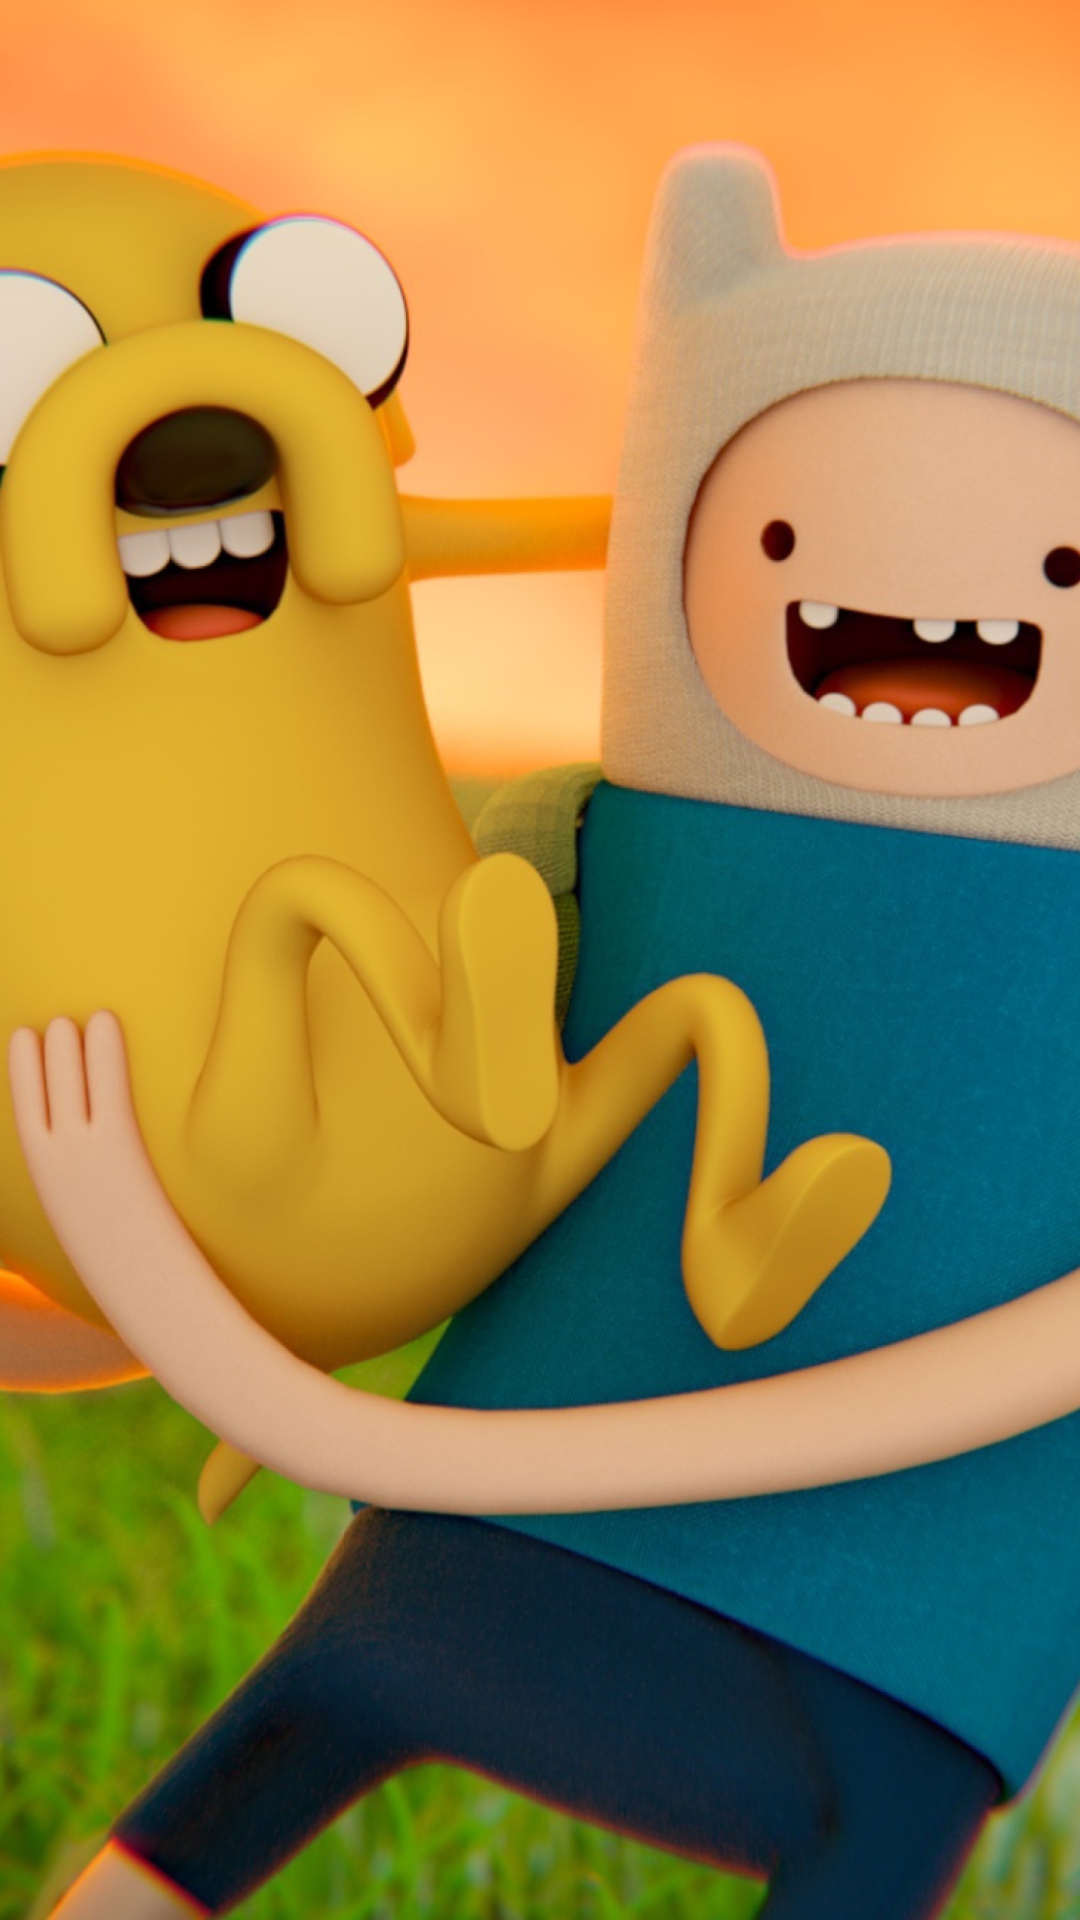 Adventure Time Finn And Jake Wallpaper For iPhone Plus